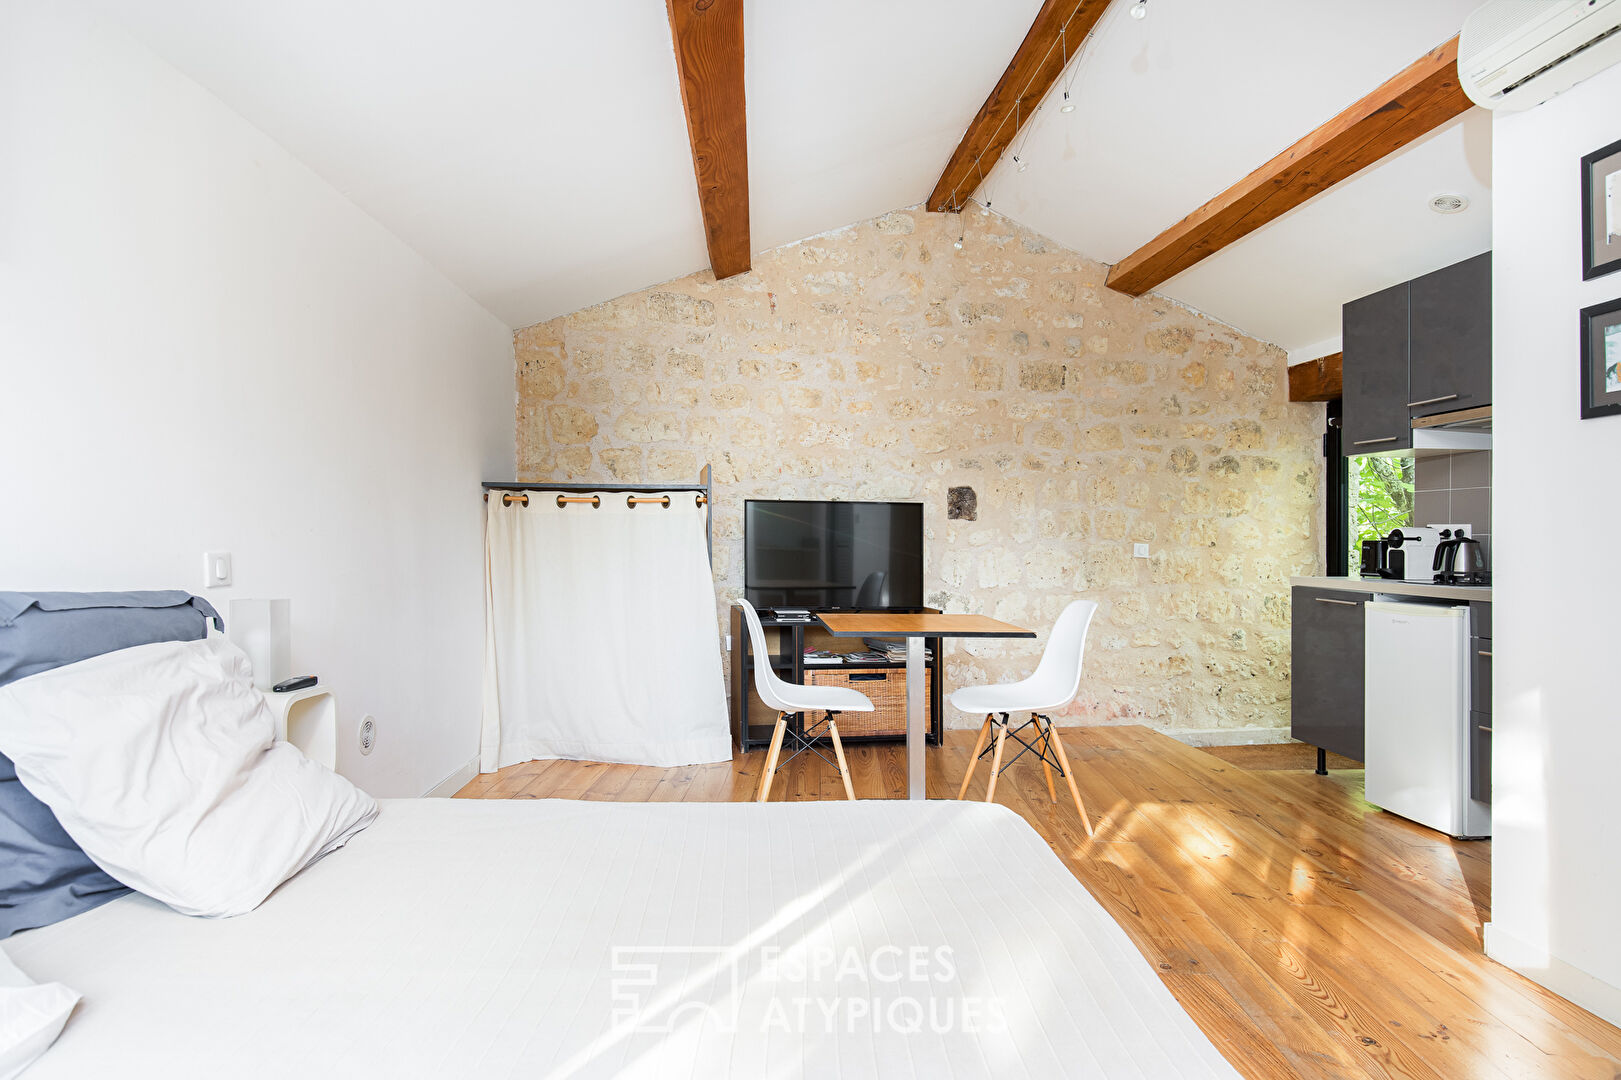 Renovated farmhouse with gîtes in the Cordaise countryside.